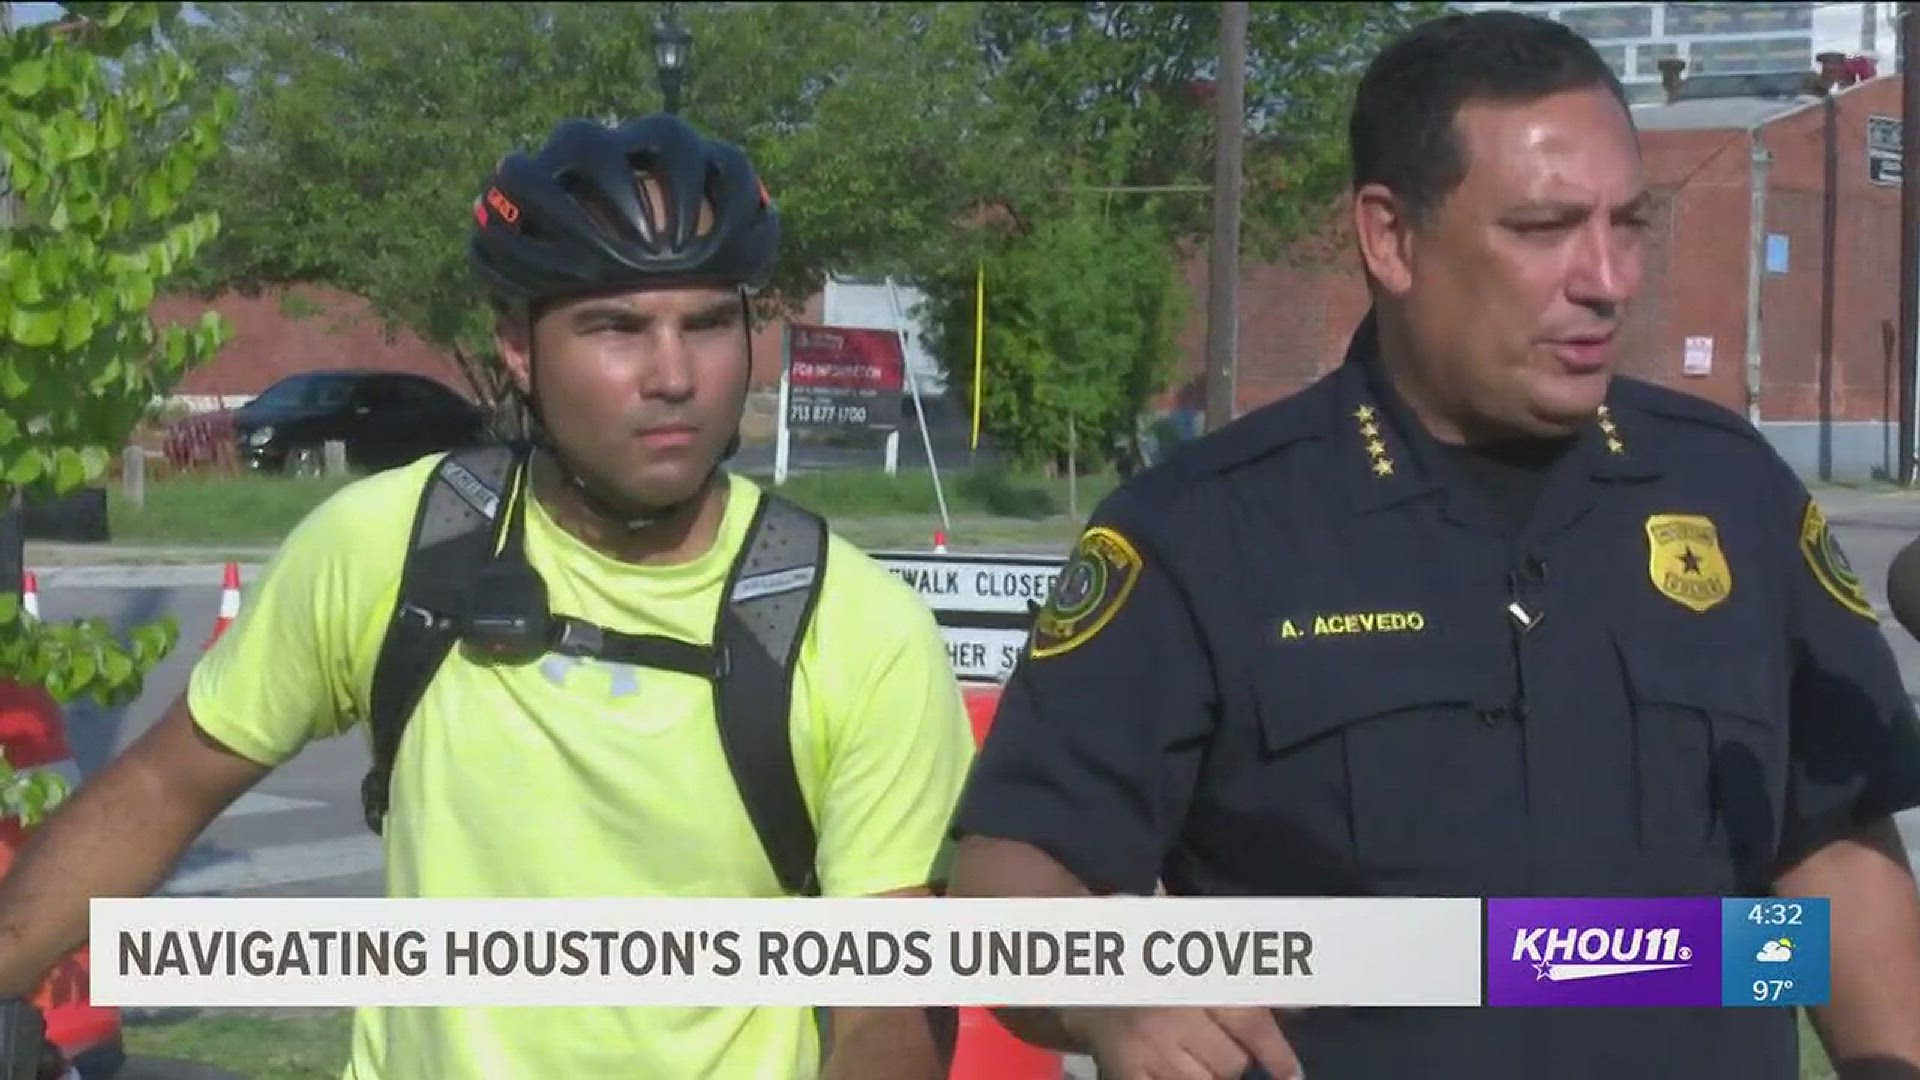 Houston Police want the public to know its enforcing the Safe Passing ordinance. Drivers need to stay three fee away when passing cyclists and six feet away if in a commercial vehicle.